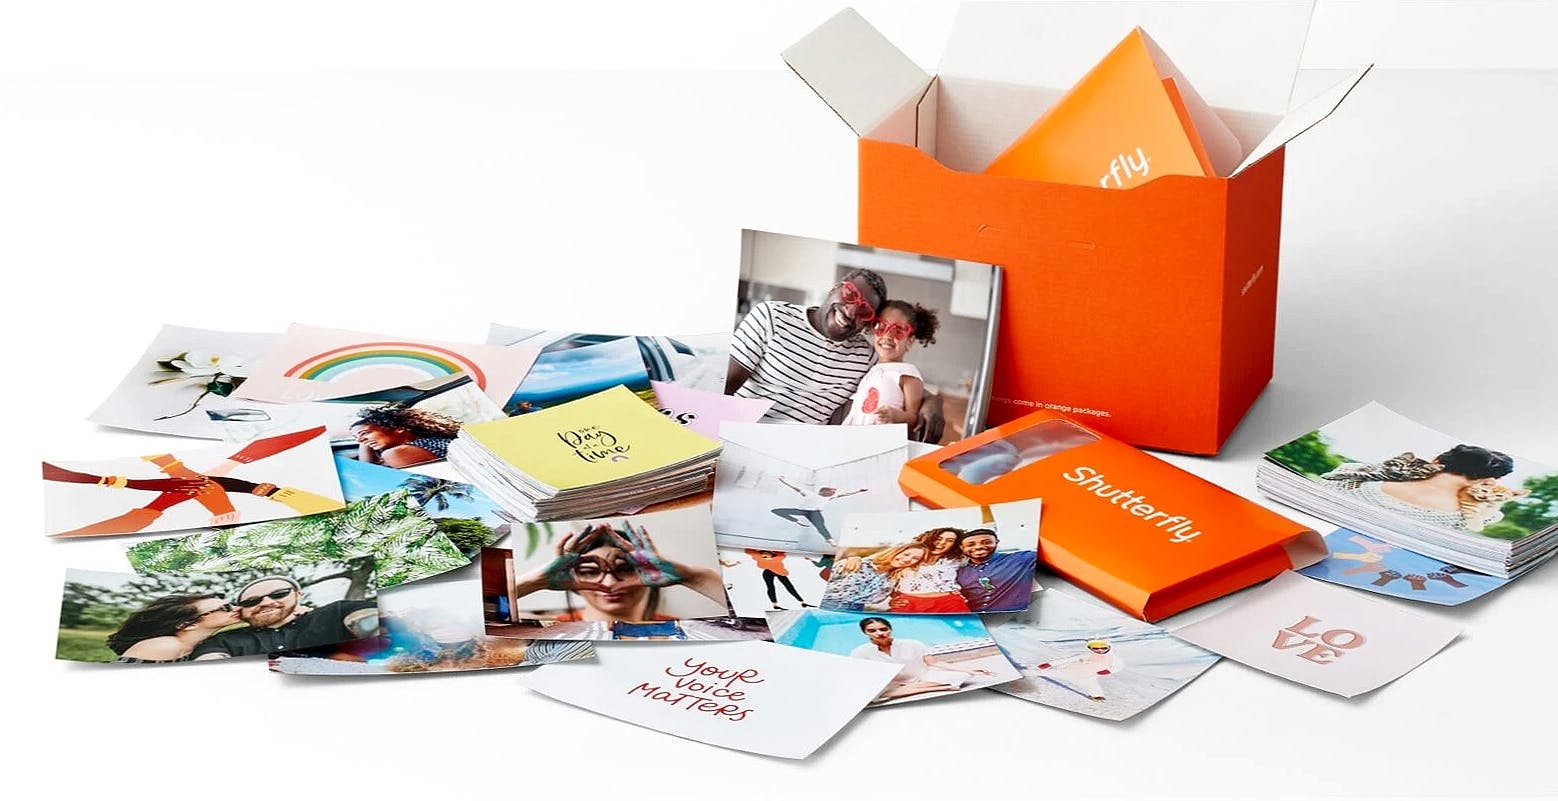 Shutterfly Coupons to Help You Save on Prints — Choose 5 Freebies!